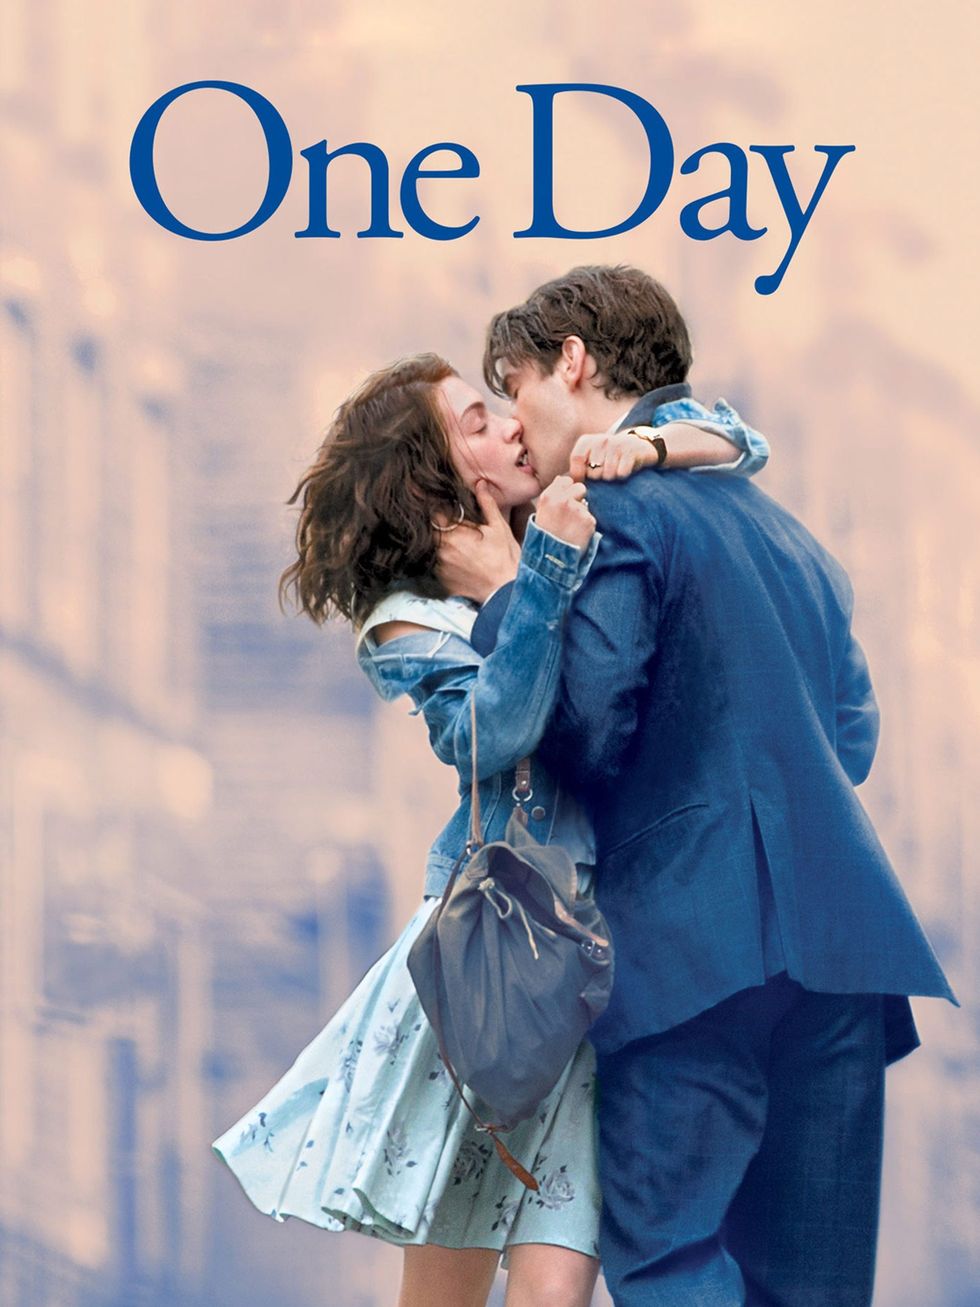 Watch One Day on Prime Video